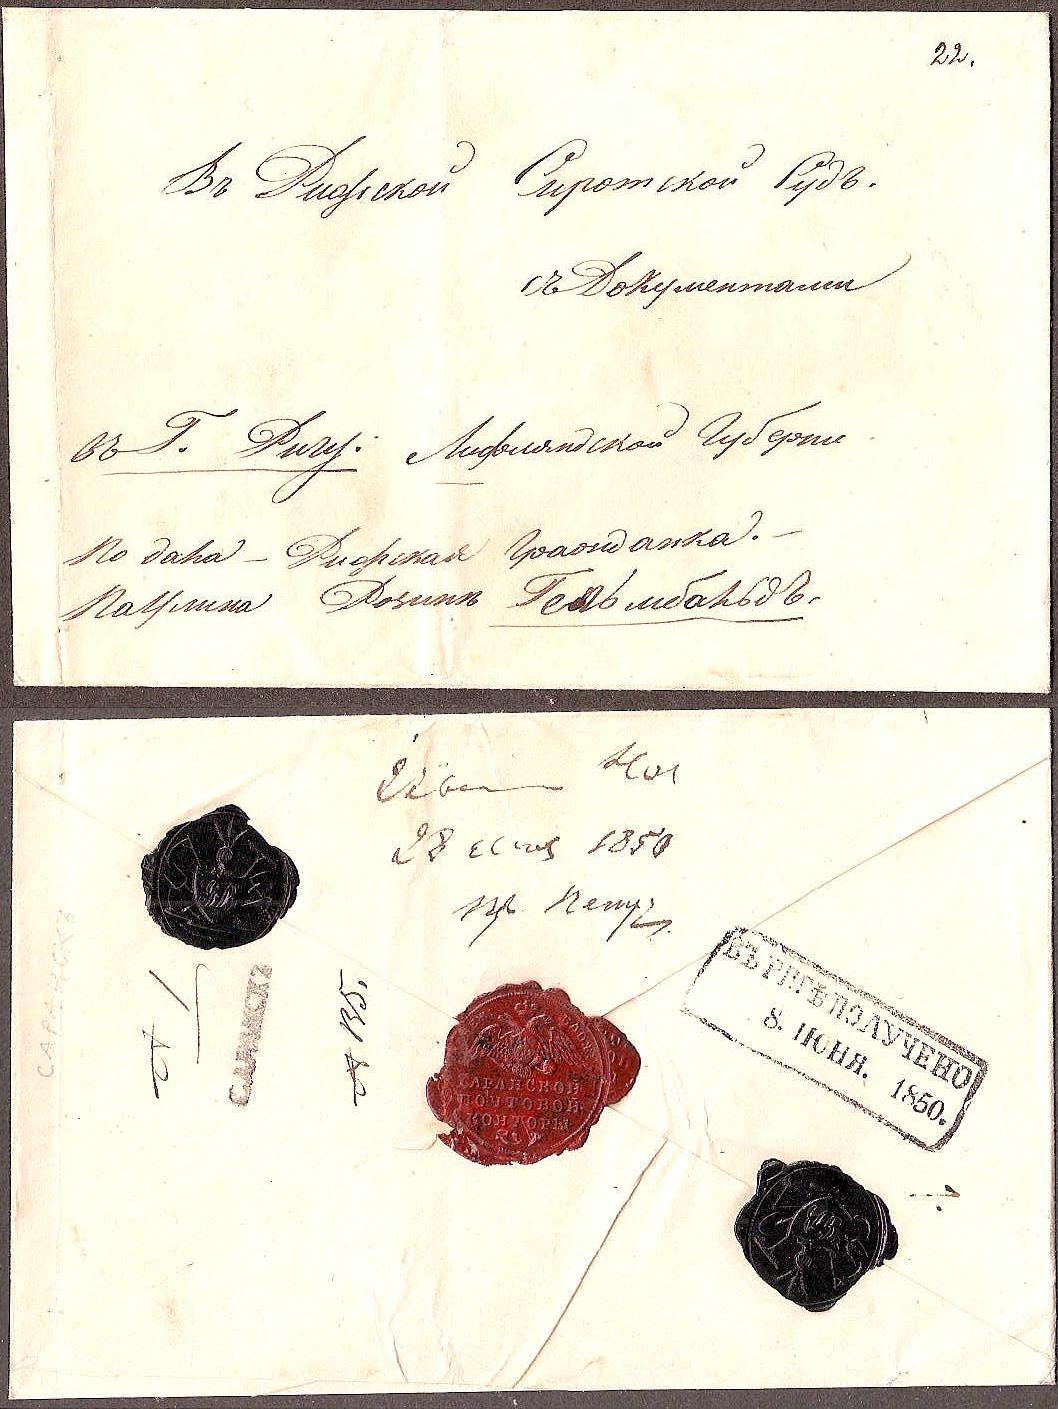 Russia Postal History - Stampless Covers Saransk Scott 3501850 